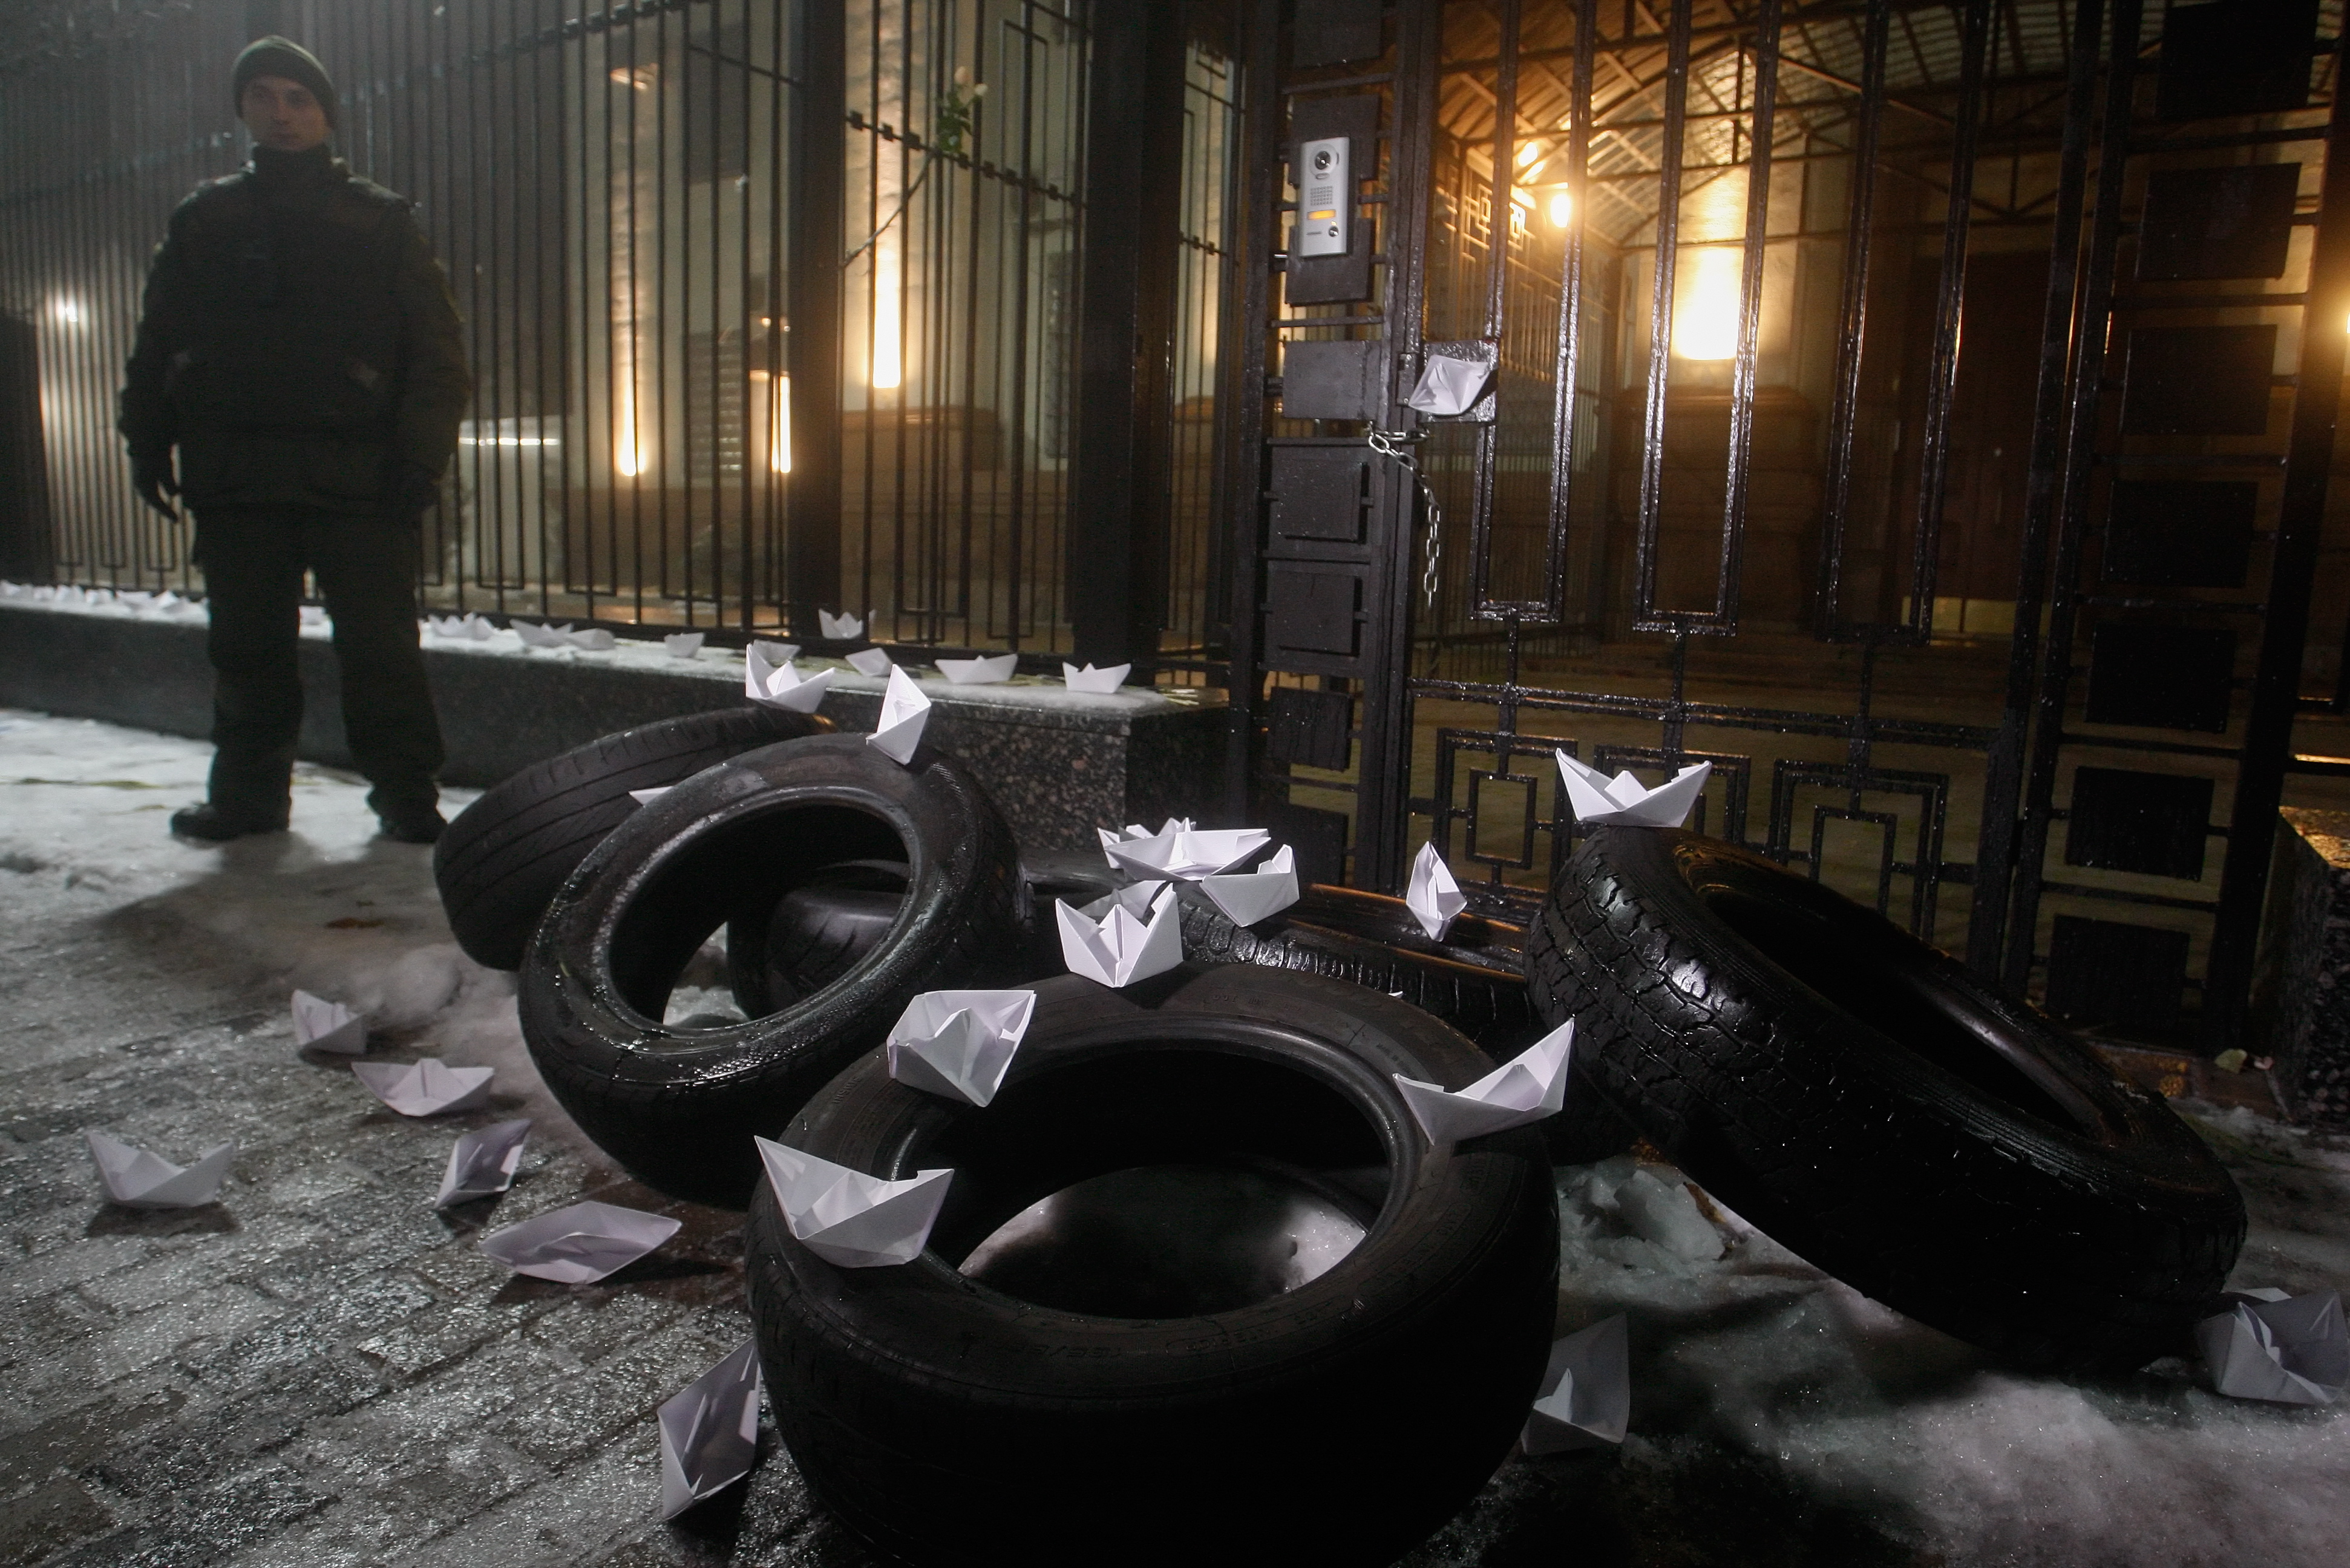 epa07190224 Protestors set up paper ships on the tires during their rally near of Russian embassy building  in Kiev, Ukraine, 25 November 2018. Russia has seized three Ukrainian vessels amid their leaving the Kerch Strait; Ukrainian President Petro Poroshenko is gathering the Military Cabinet over the incident. The two small-sized 'Berdiansk' and 'Nikopol' armored artillery boats have come under enemy fire and are now dead in the water. The 'Yany Kapu' tugboat has forcibly been stopped. The vessels have been captured by special forces of the Russian Federation, the press service of Ukraine's Navy said on Facebook on Sunday evening. The Ukrainian Navy also reported the number of the Ukrainian servicemen wounded in the incident grew to two persons as Ukrainian media report.  EPA/STEPAN FRANKO  EPA-EFE/STEPAN FRANKO